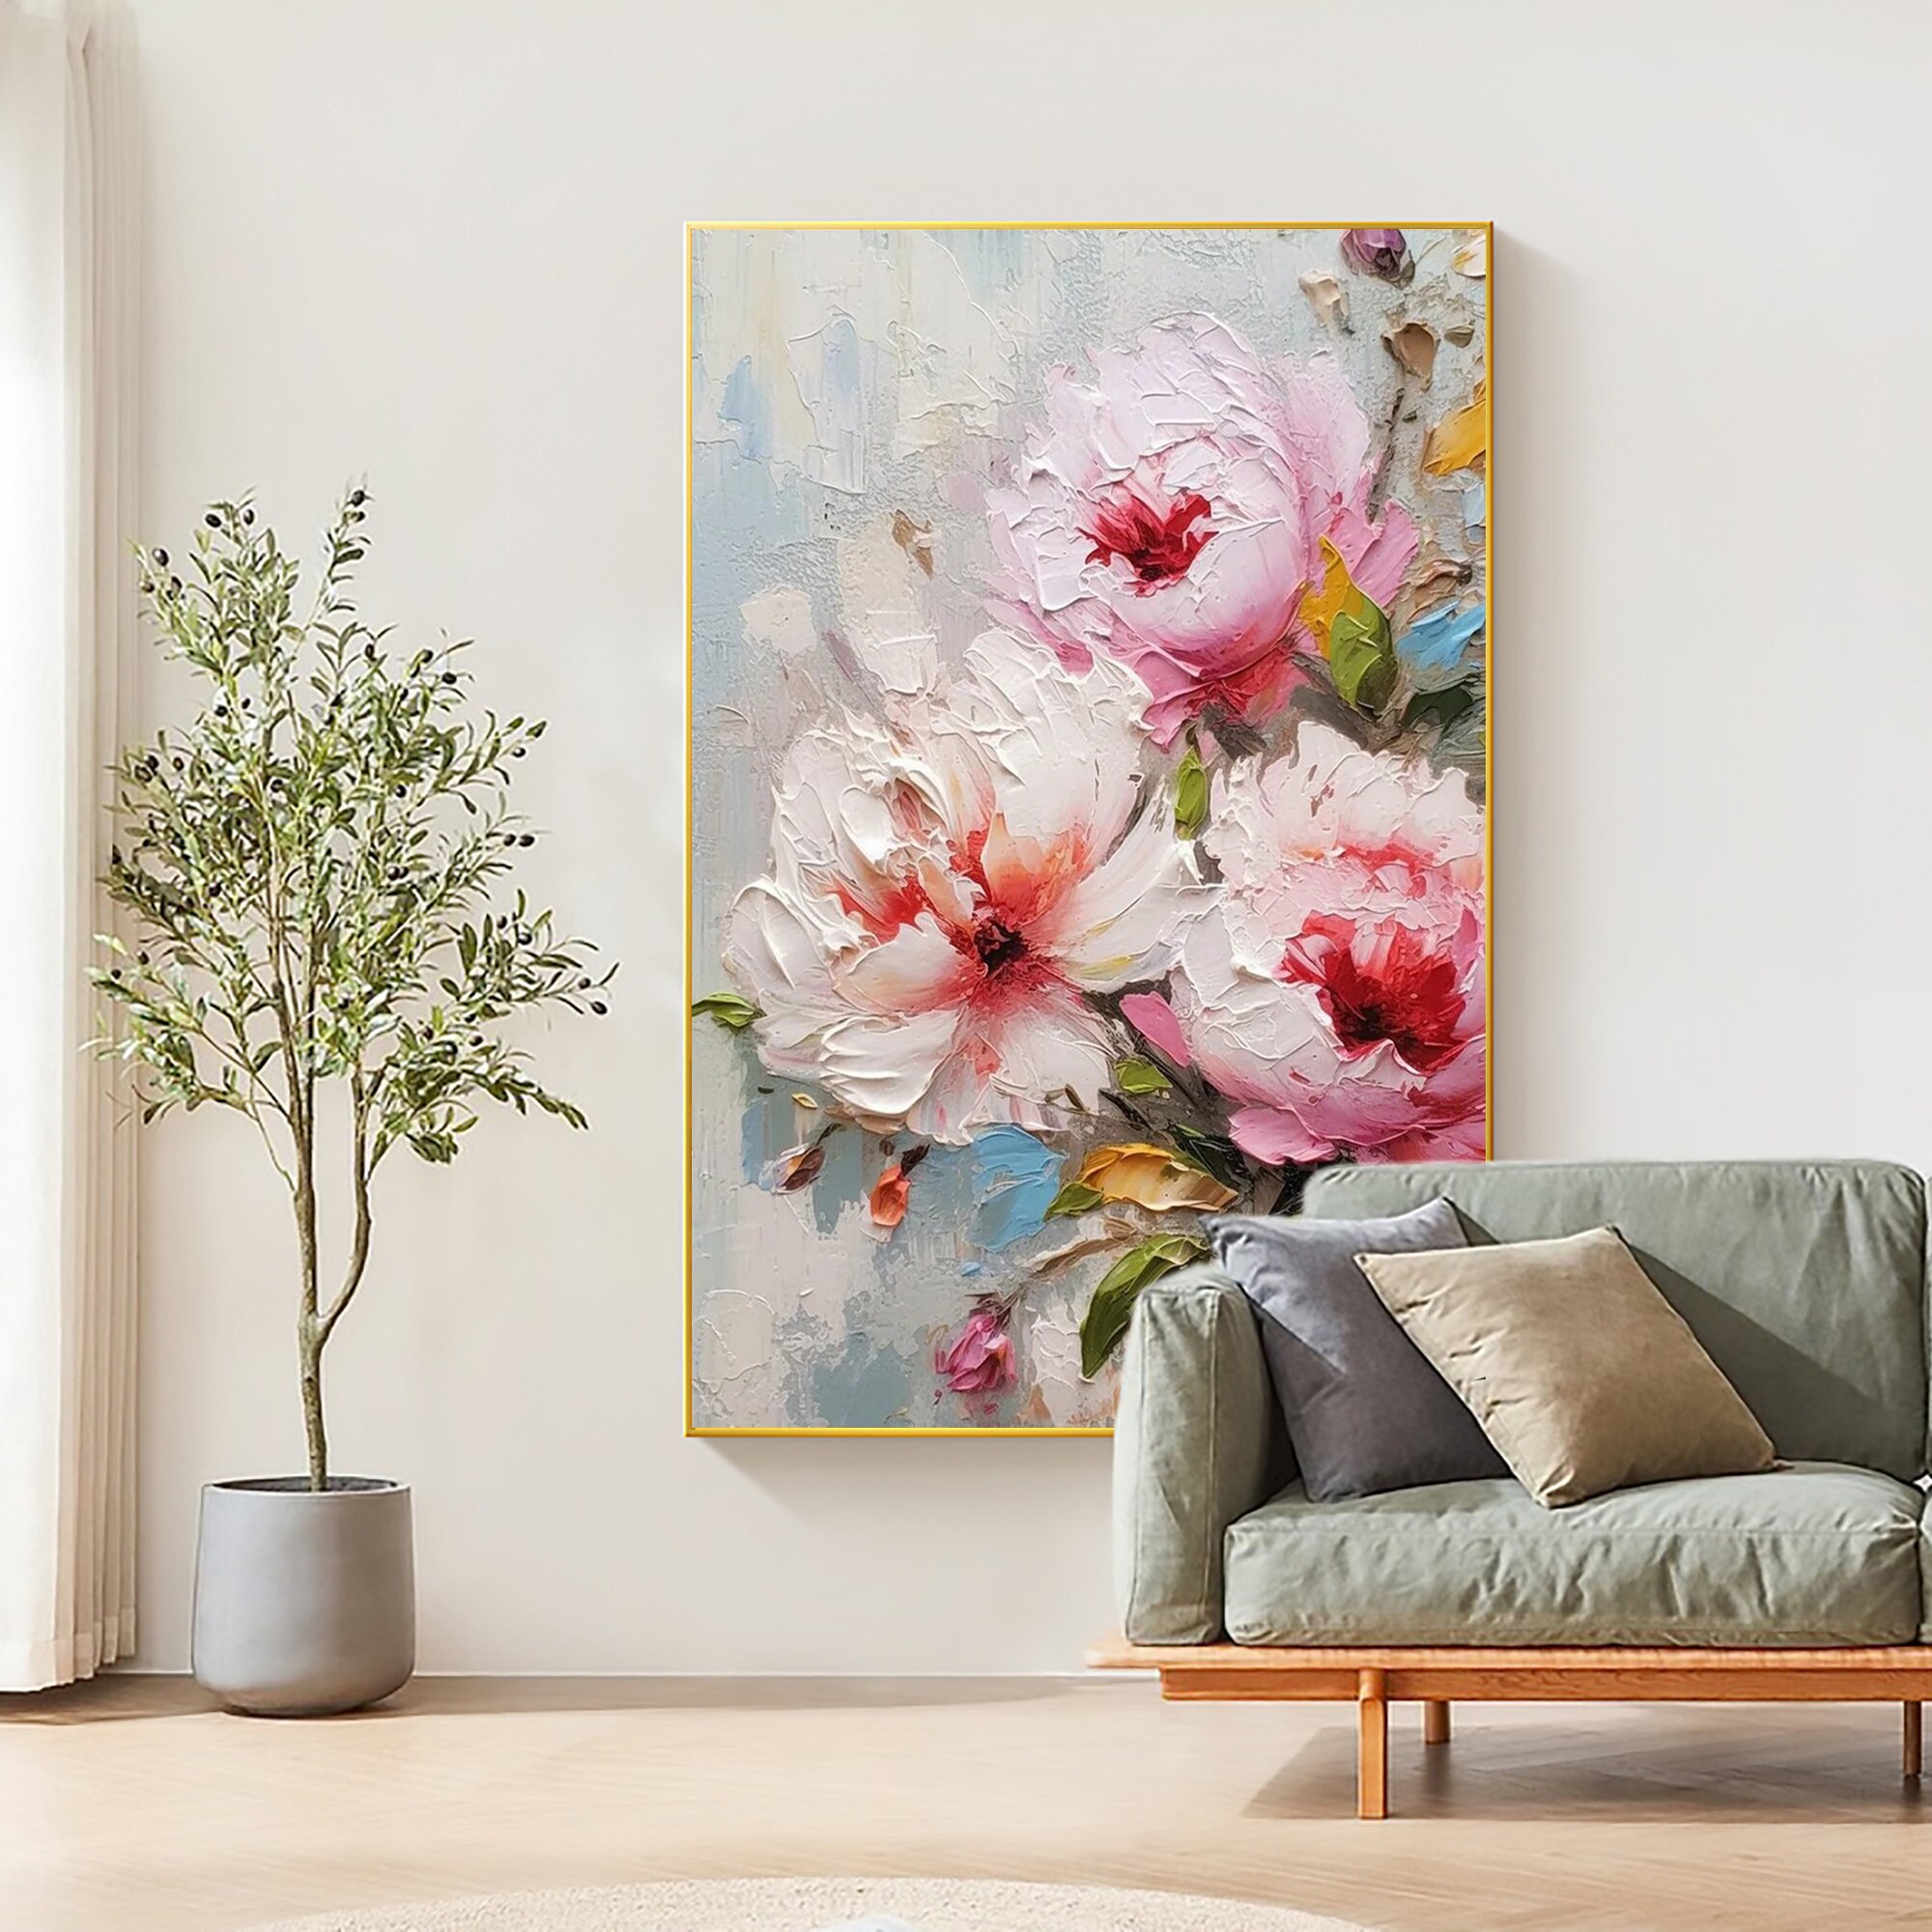 Original Flower Oil Painting on Canvas, Large Wall Art, Abstract Pink ...